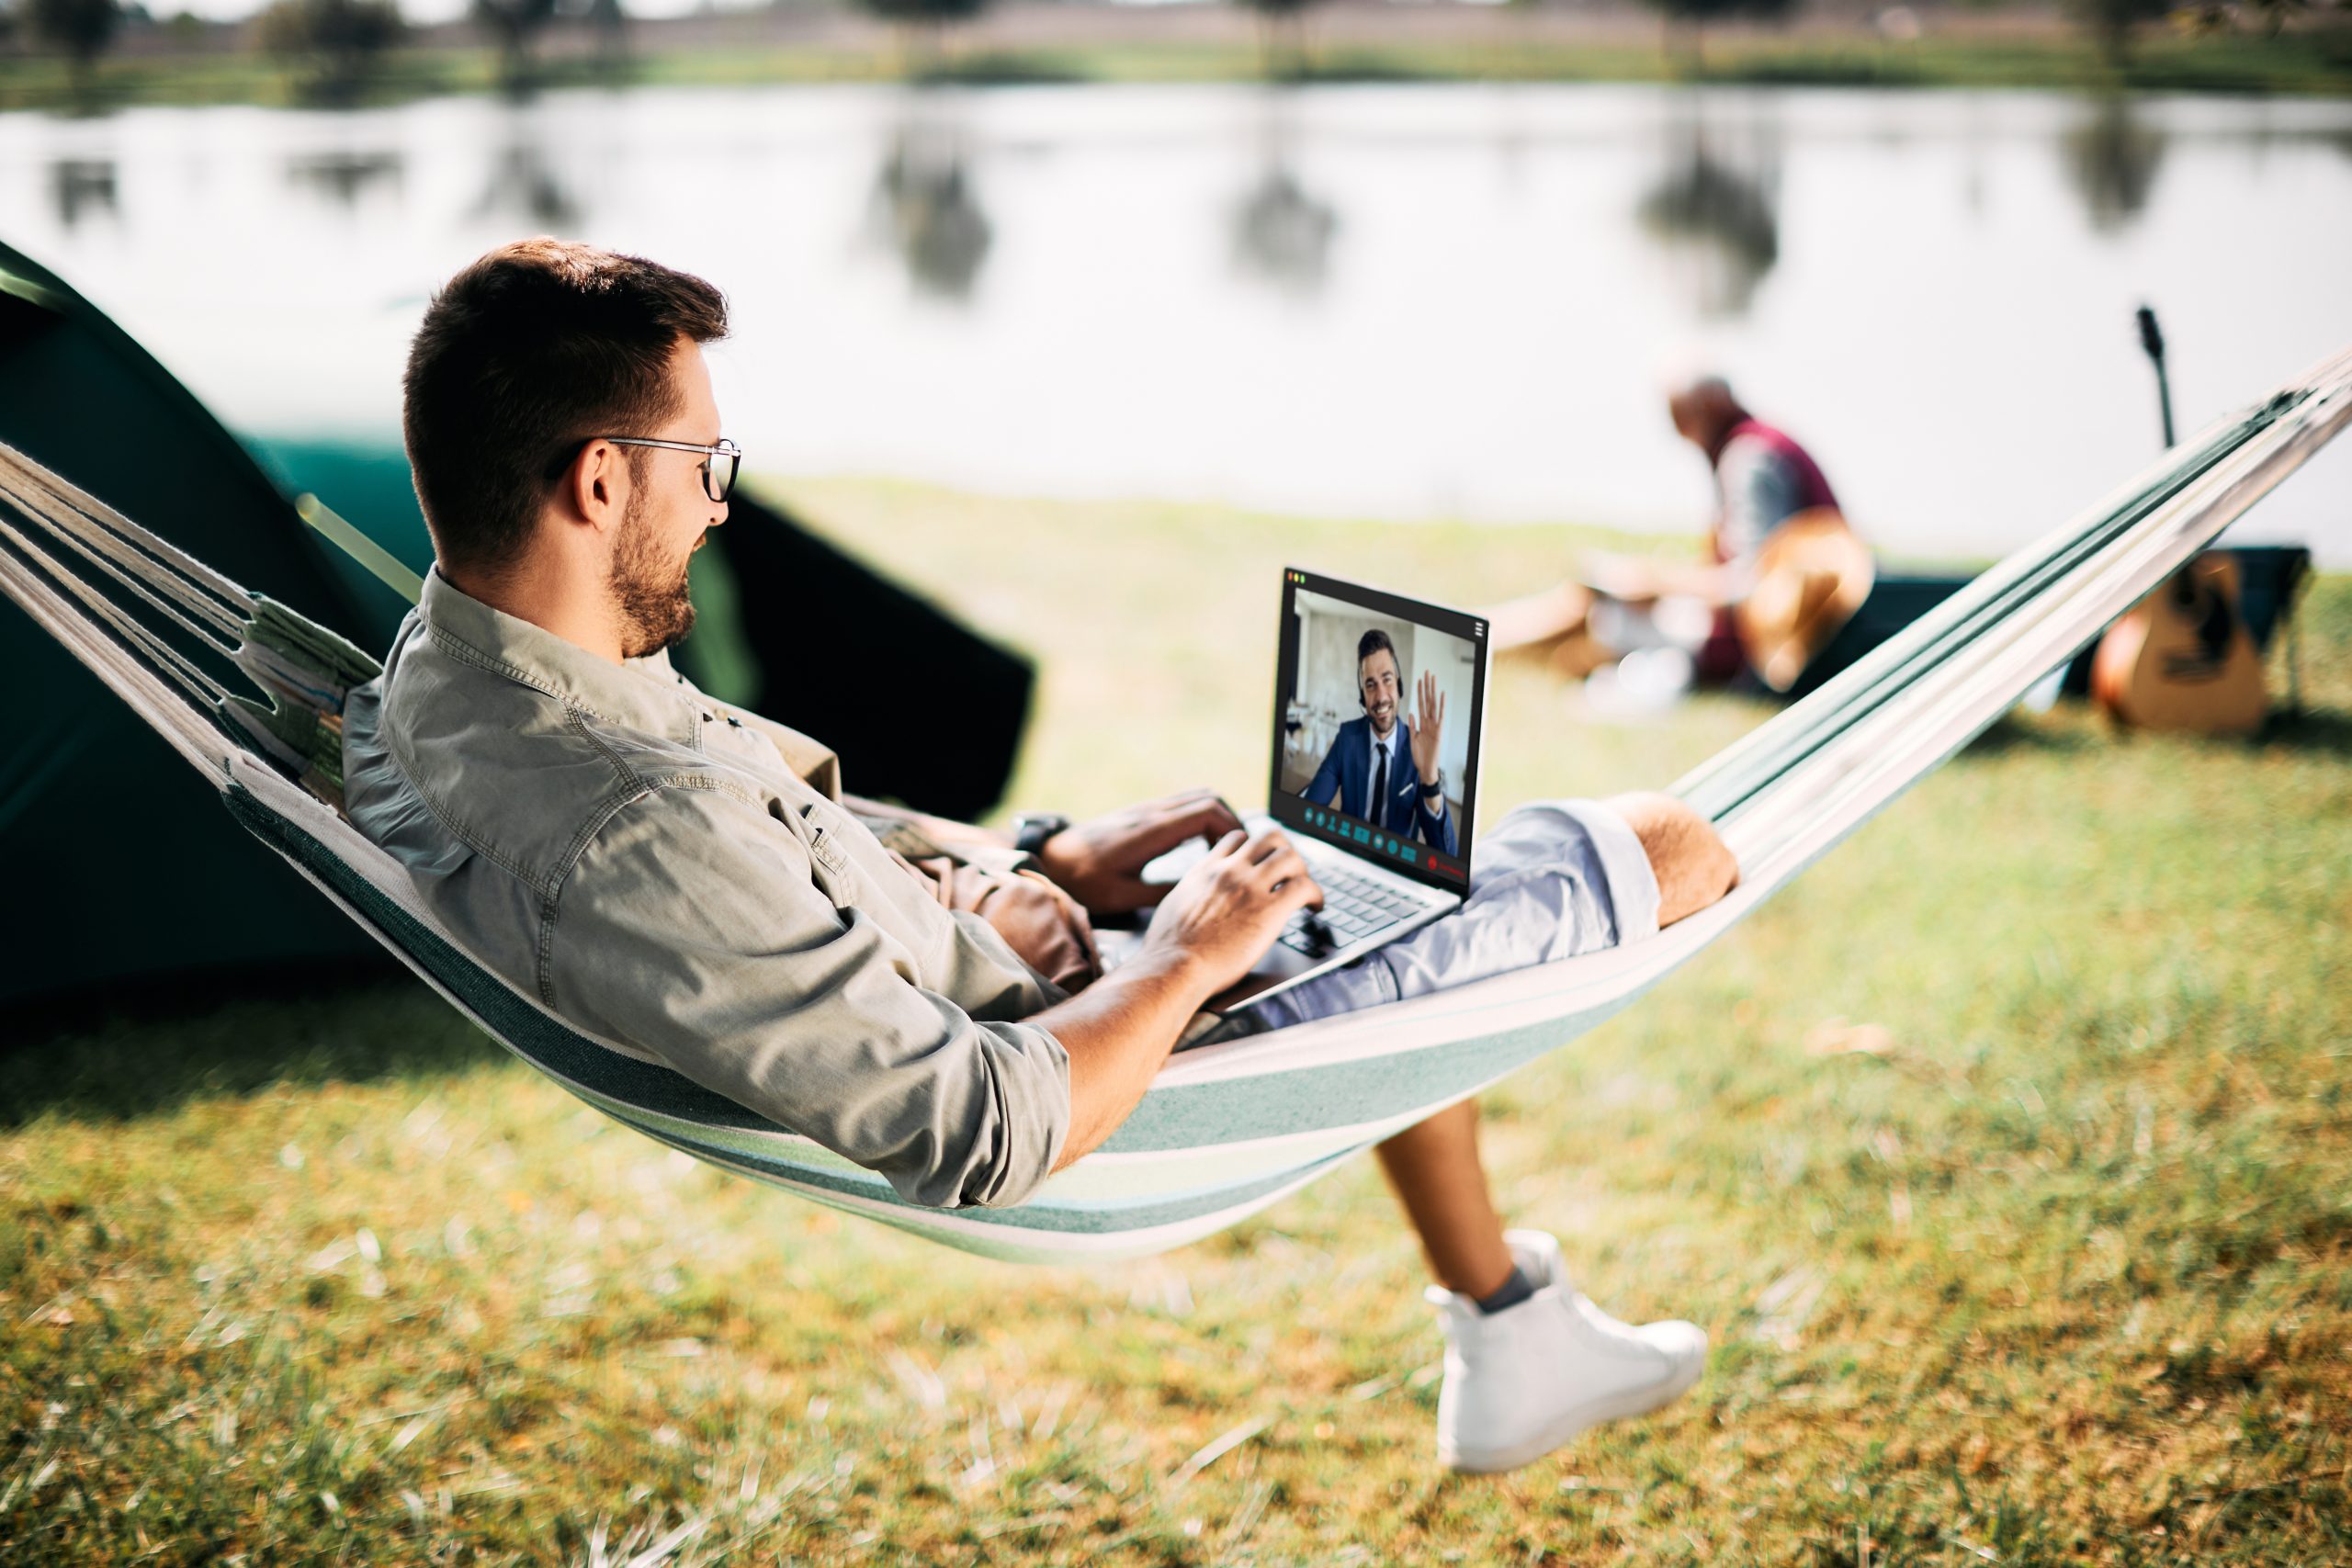 The Do’s and Don’ts of Remote Work